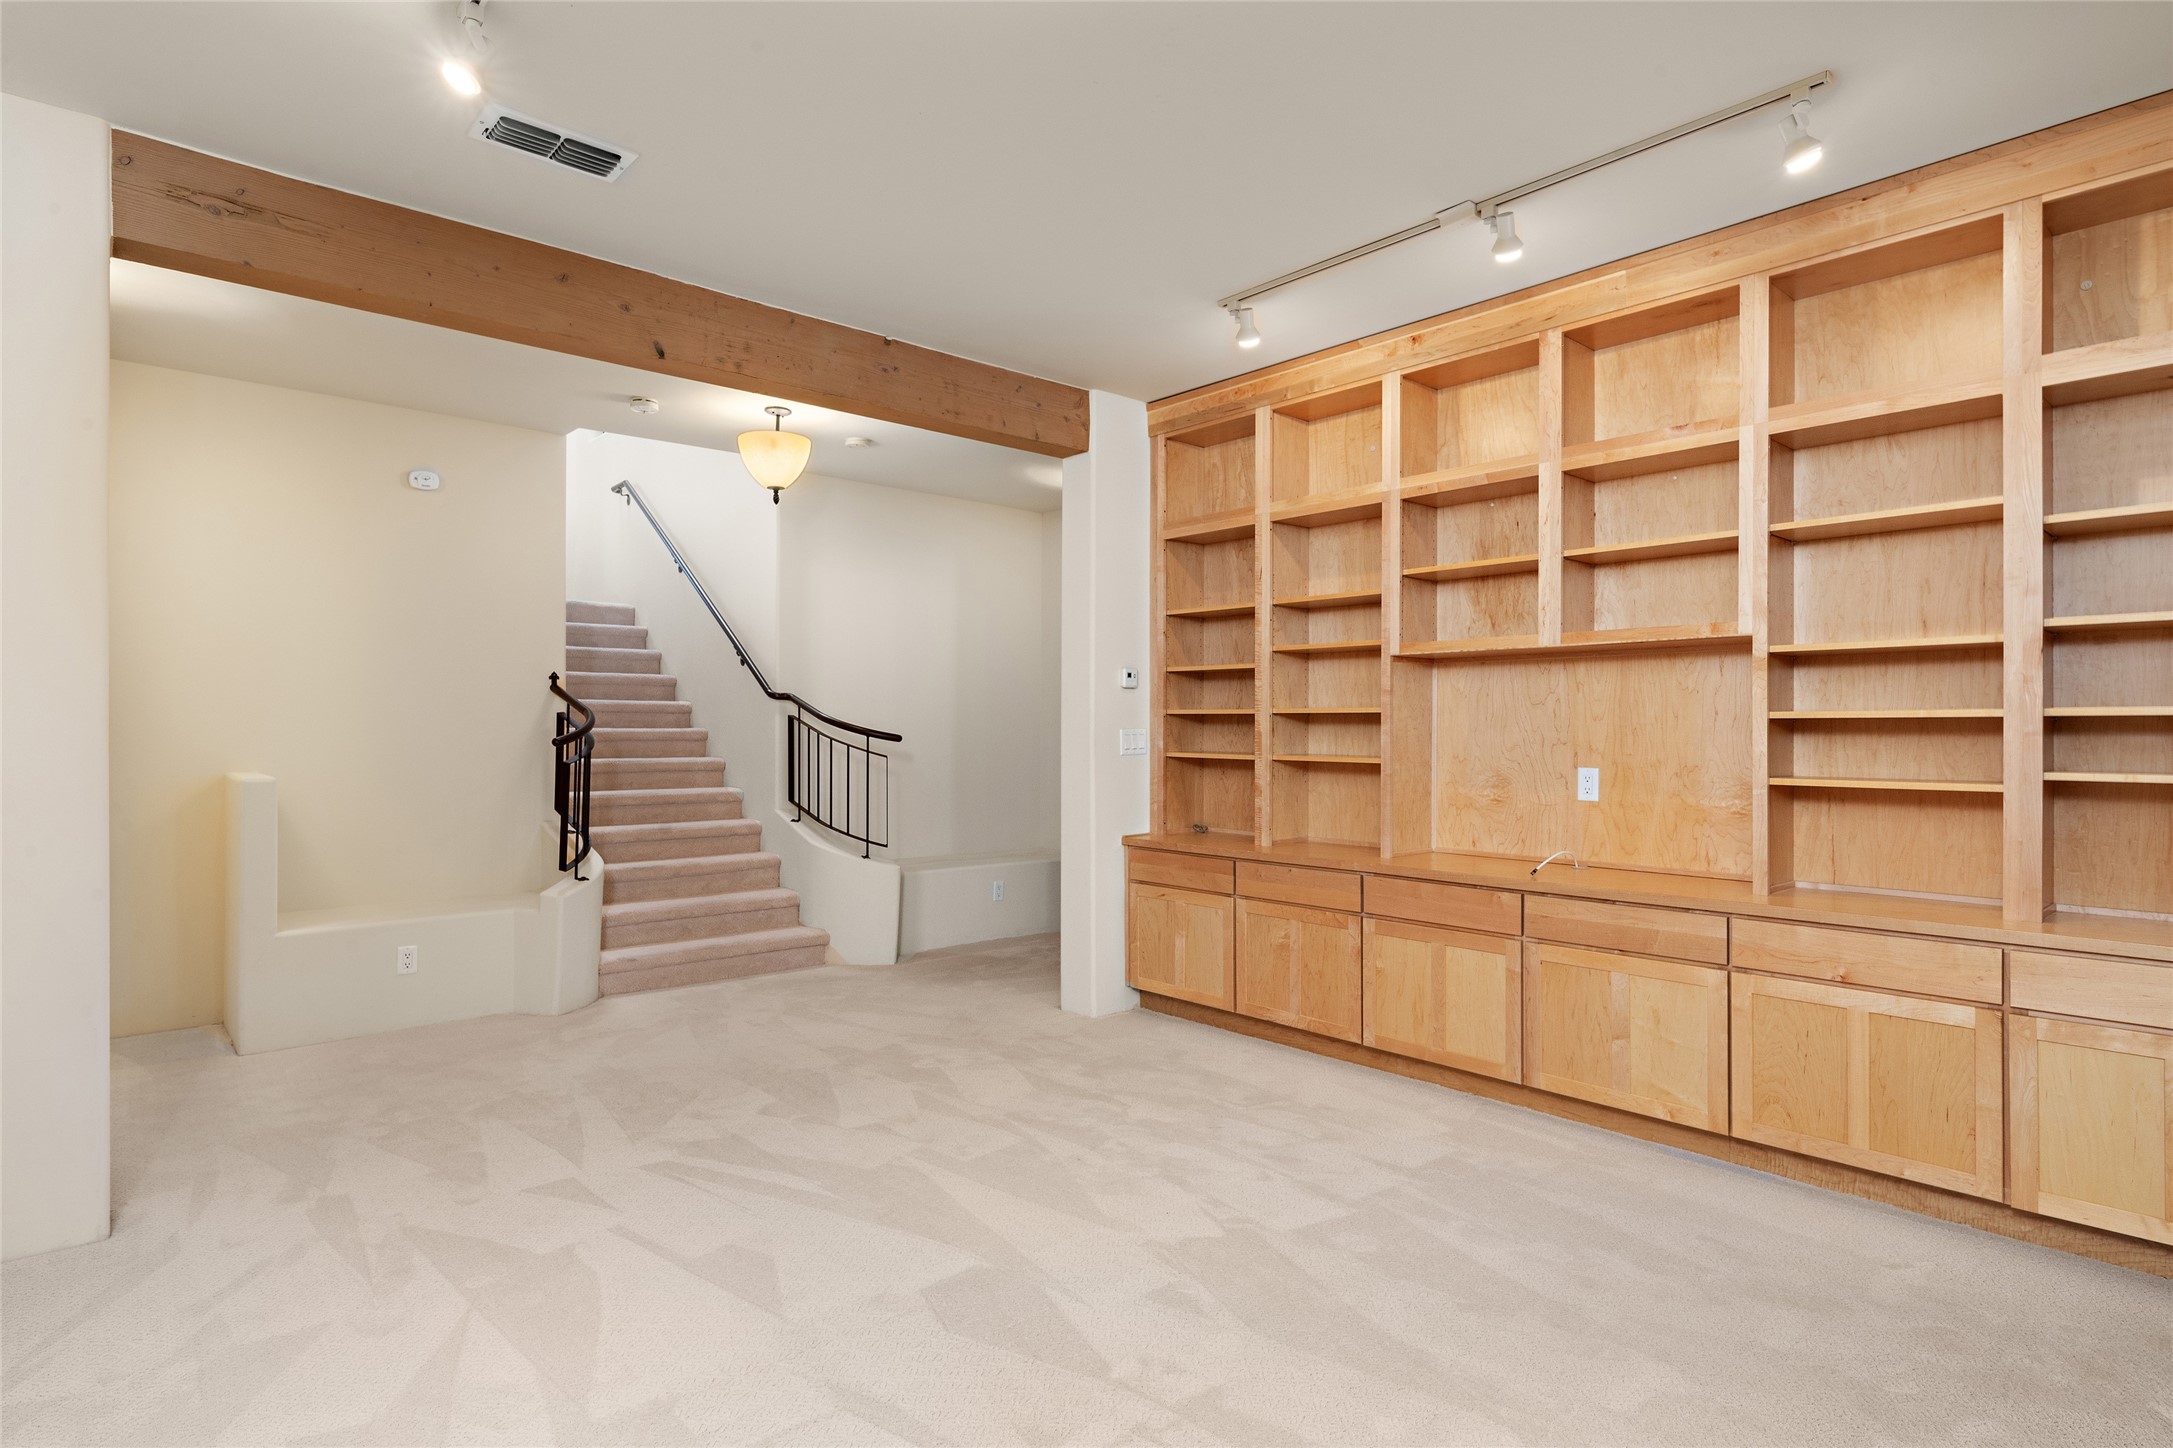 Beautiful down stairs room (Den, TV, Office or flex room downstairs) with build in bookcases